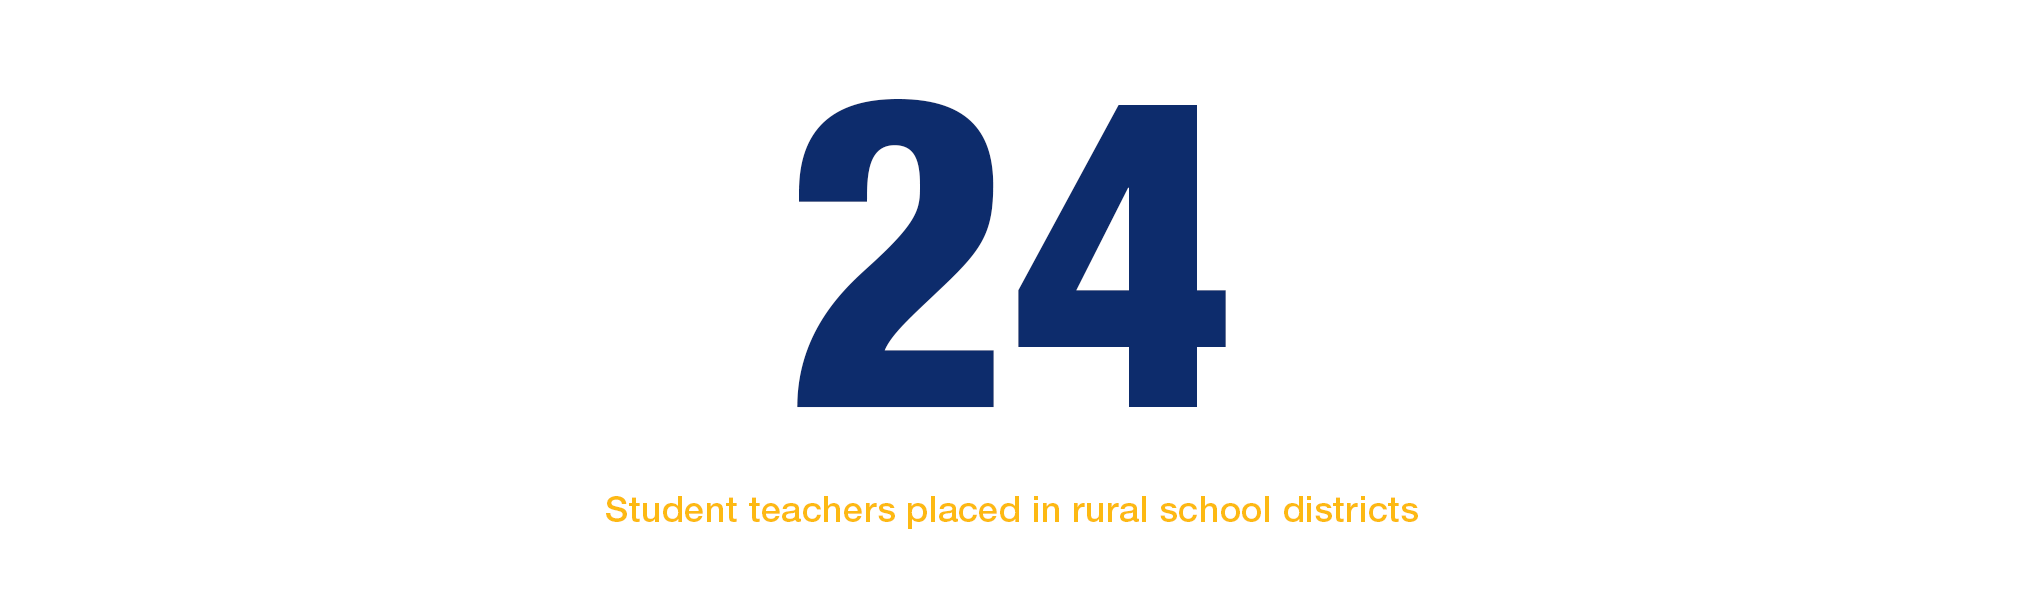 24 Student teachers placed in rural school districts